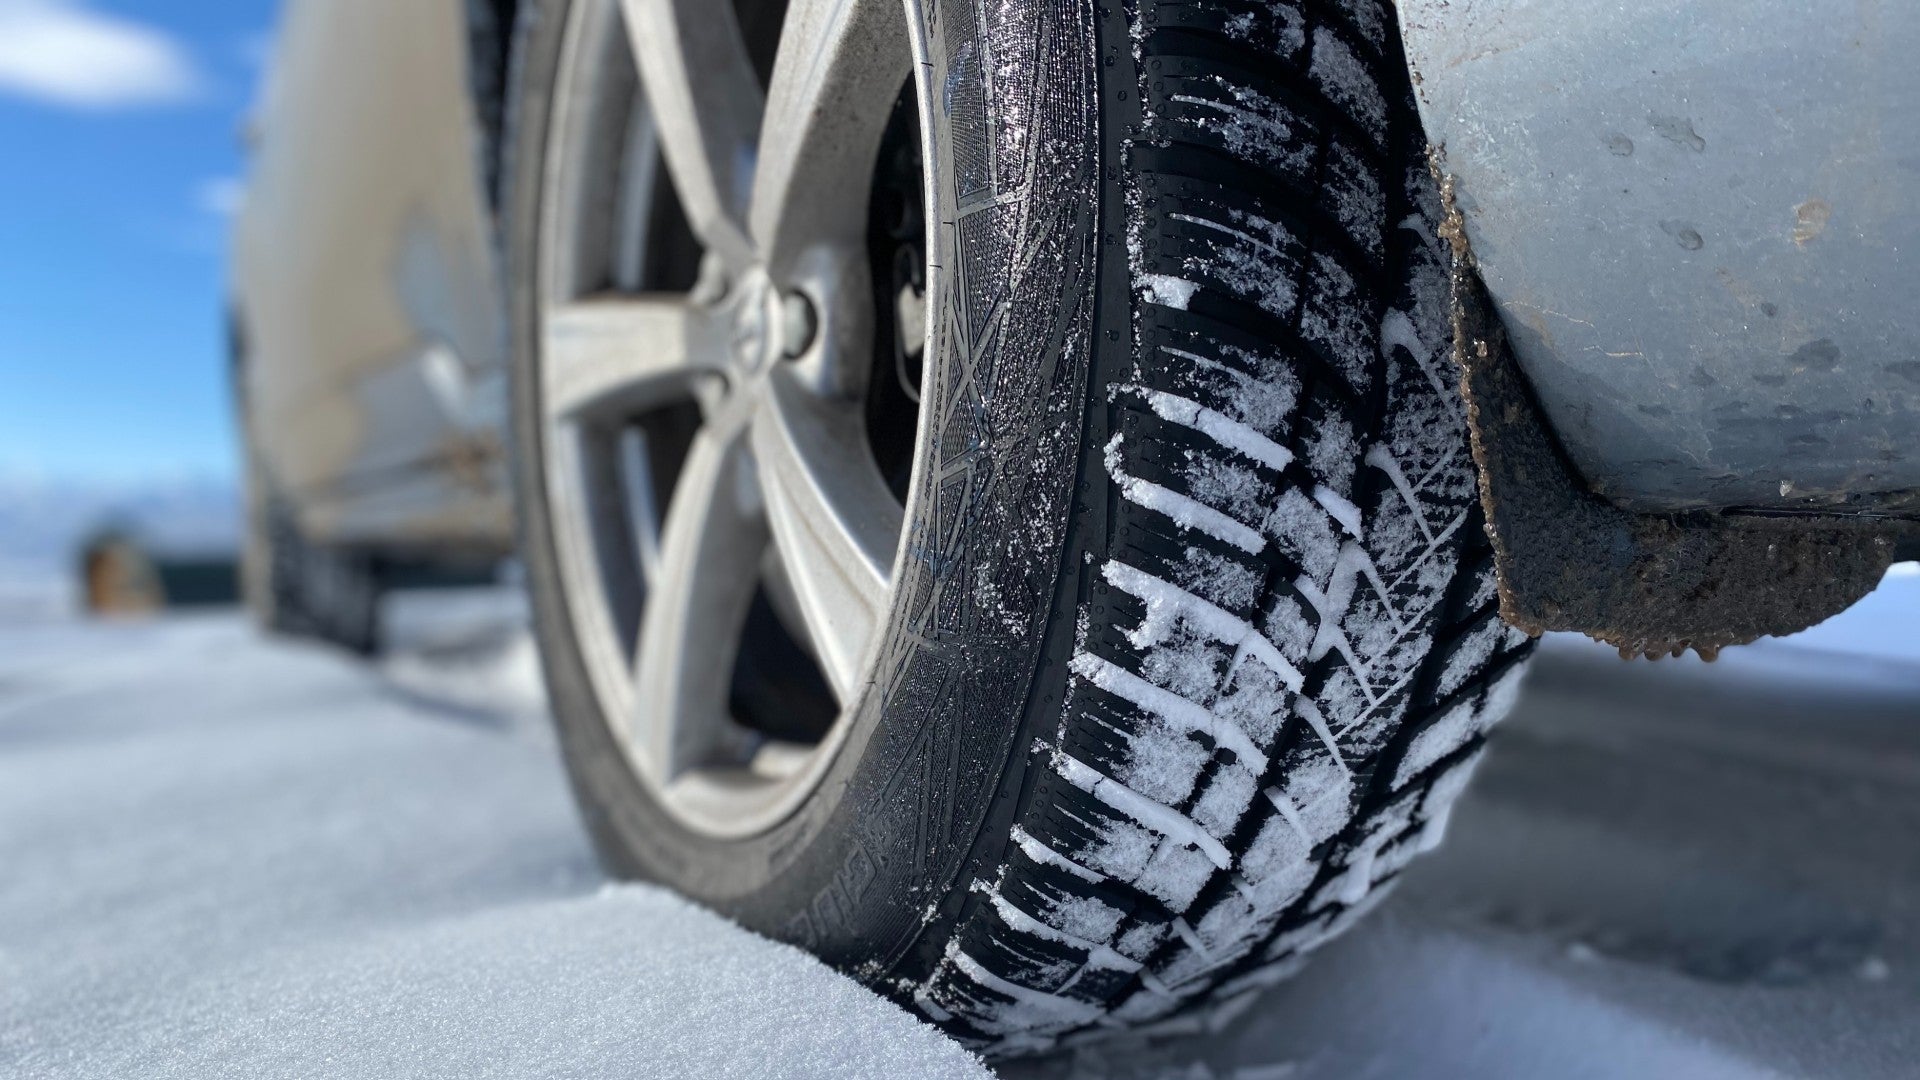 Vredestein Wintrac Pro Winter Tires Review | The Drive